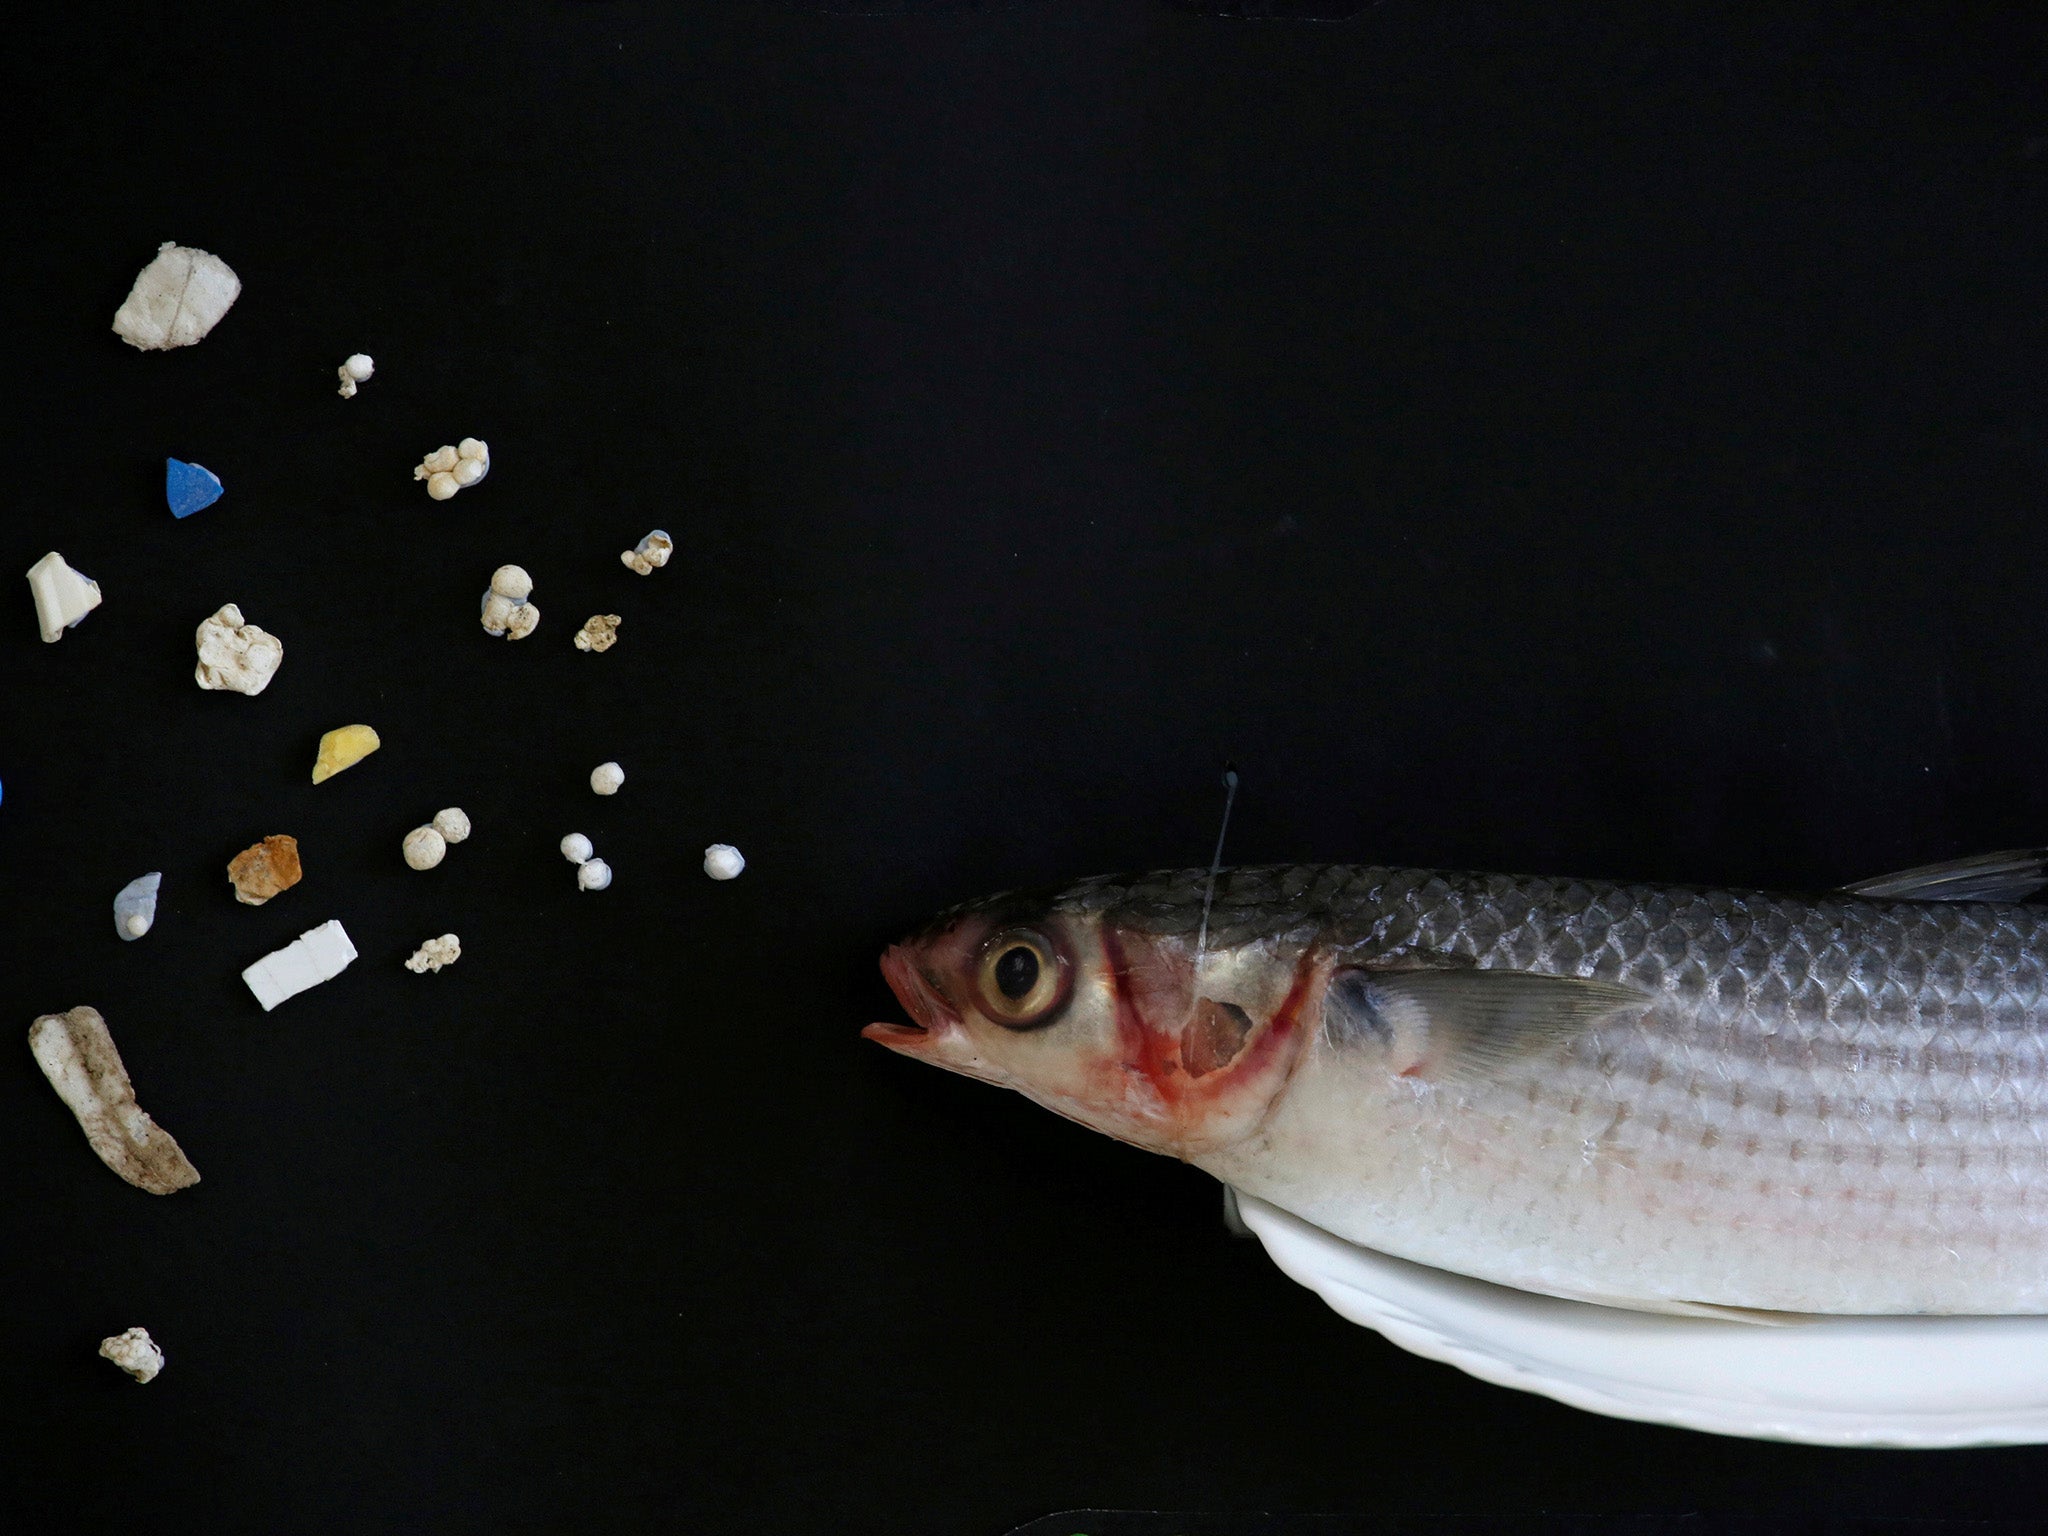 Microplastics have been found in the flesh of fish, as well as their stomachs and mussels can also be contaminated too